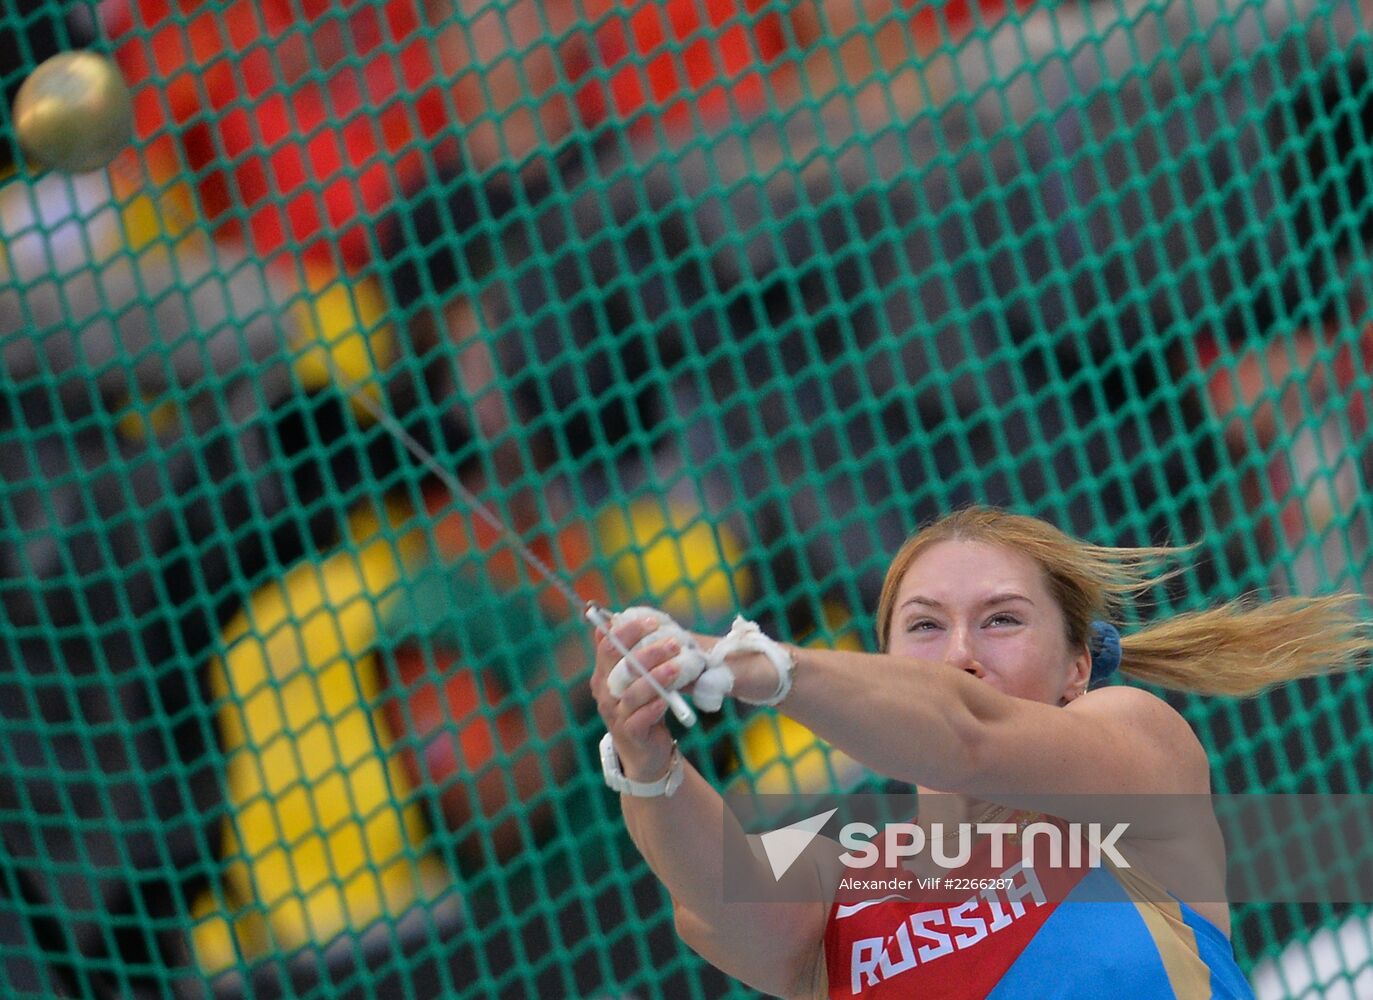 2013 IAAF World Championships. Day Seven. Evening session